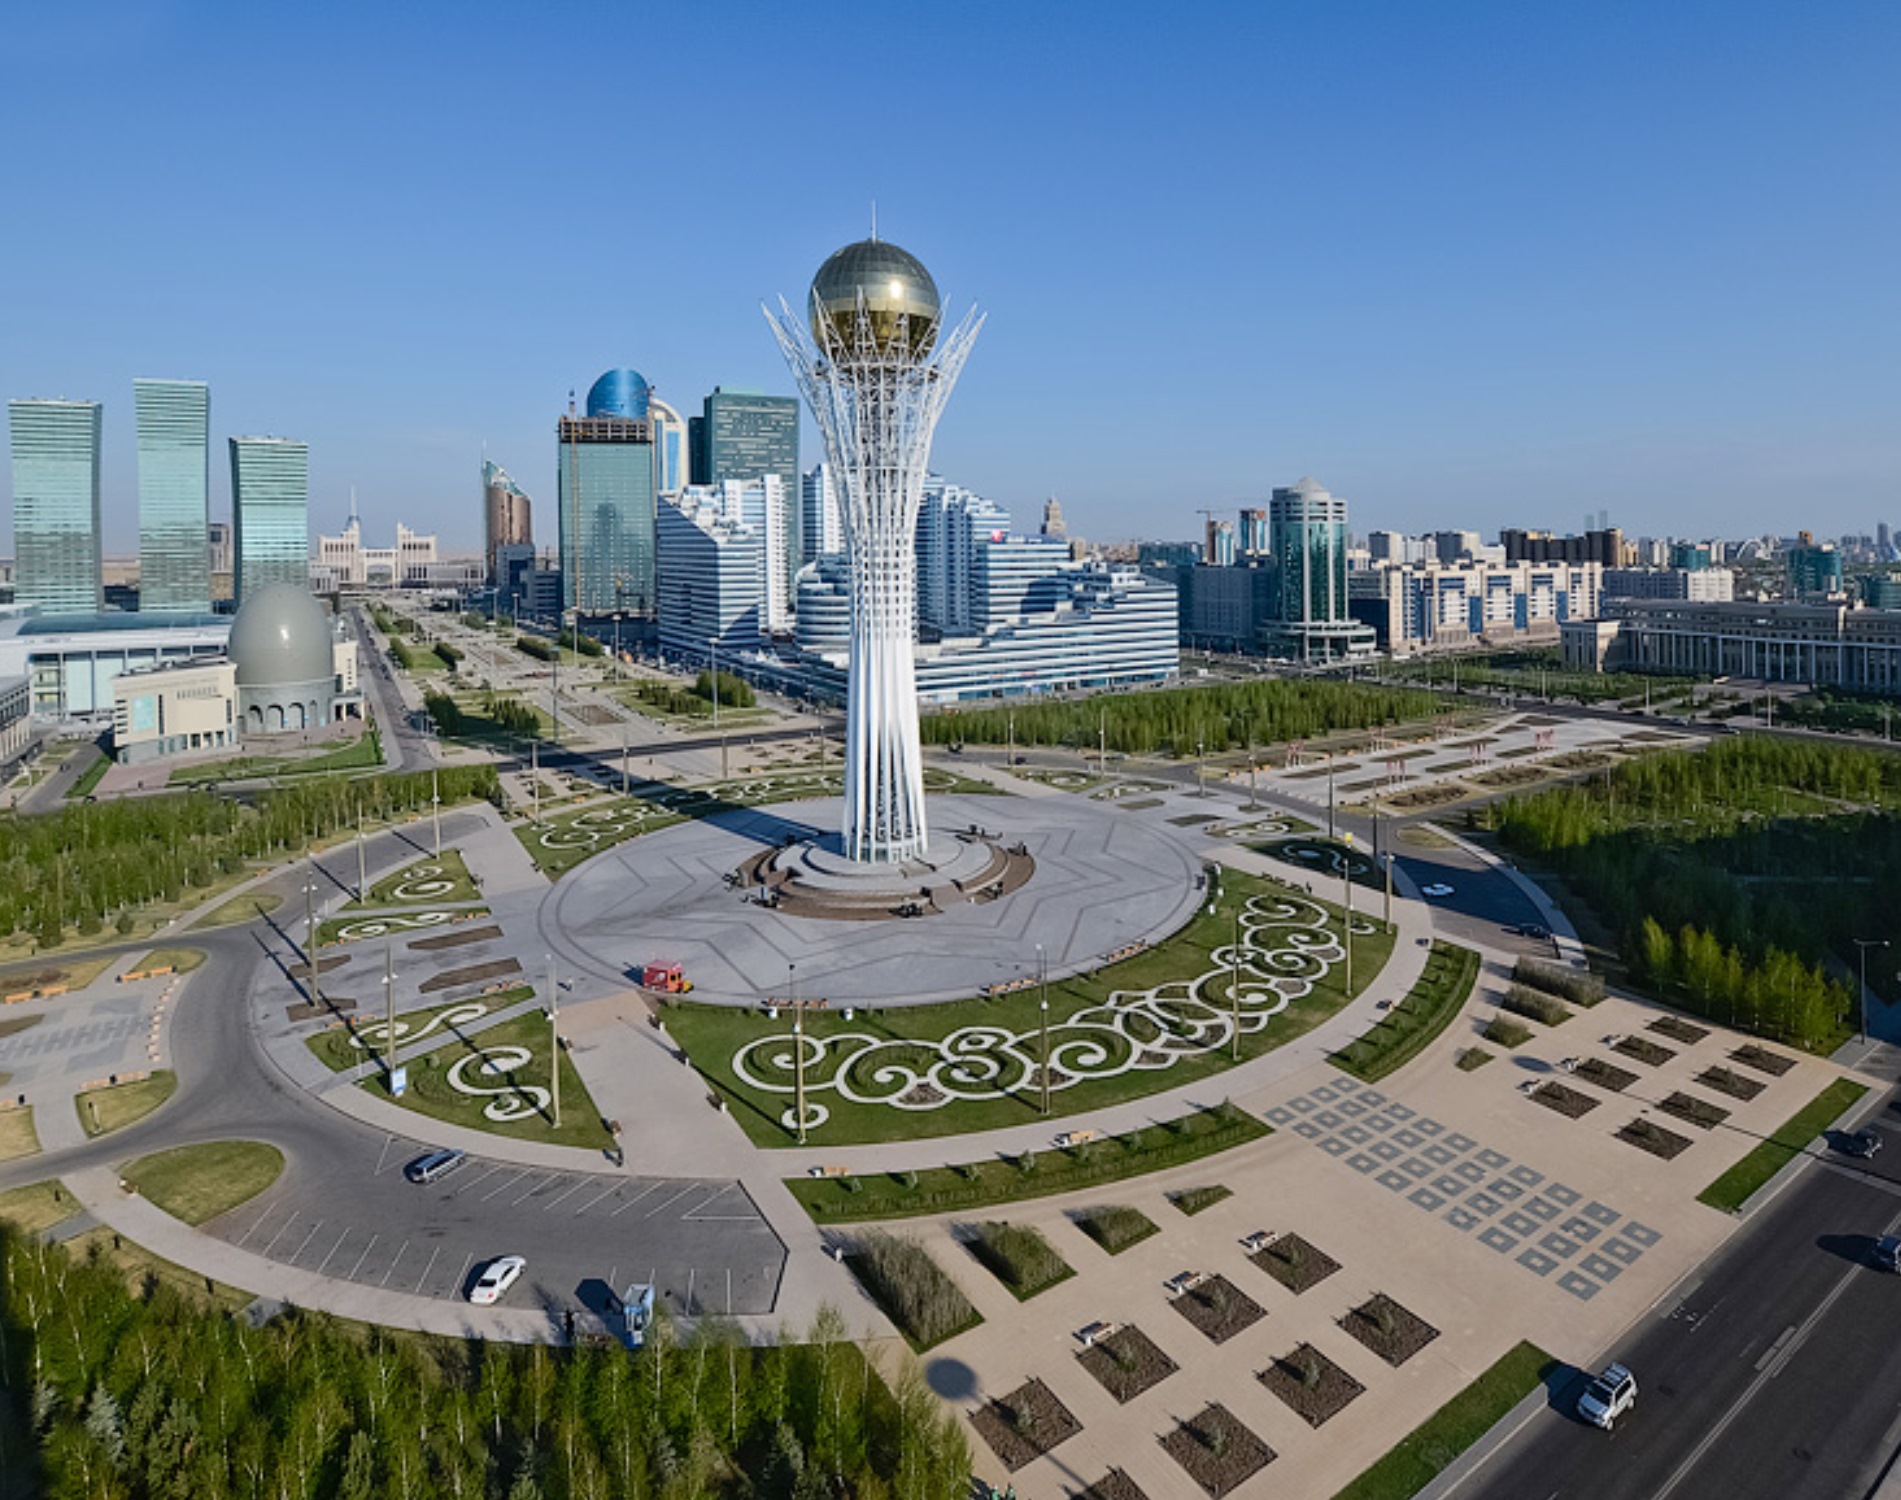 /-/media/images/website/background-images/offices/astana/astana.ashx